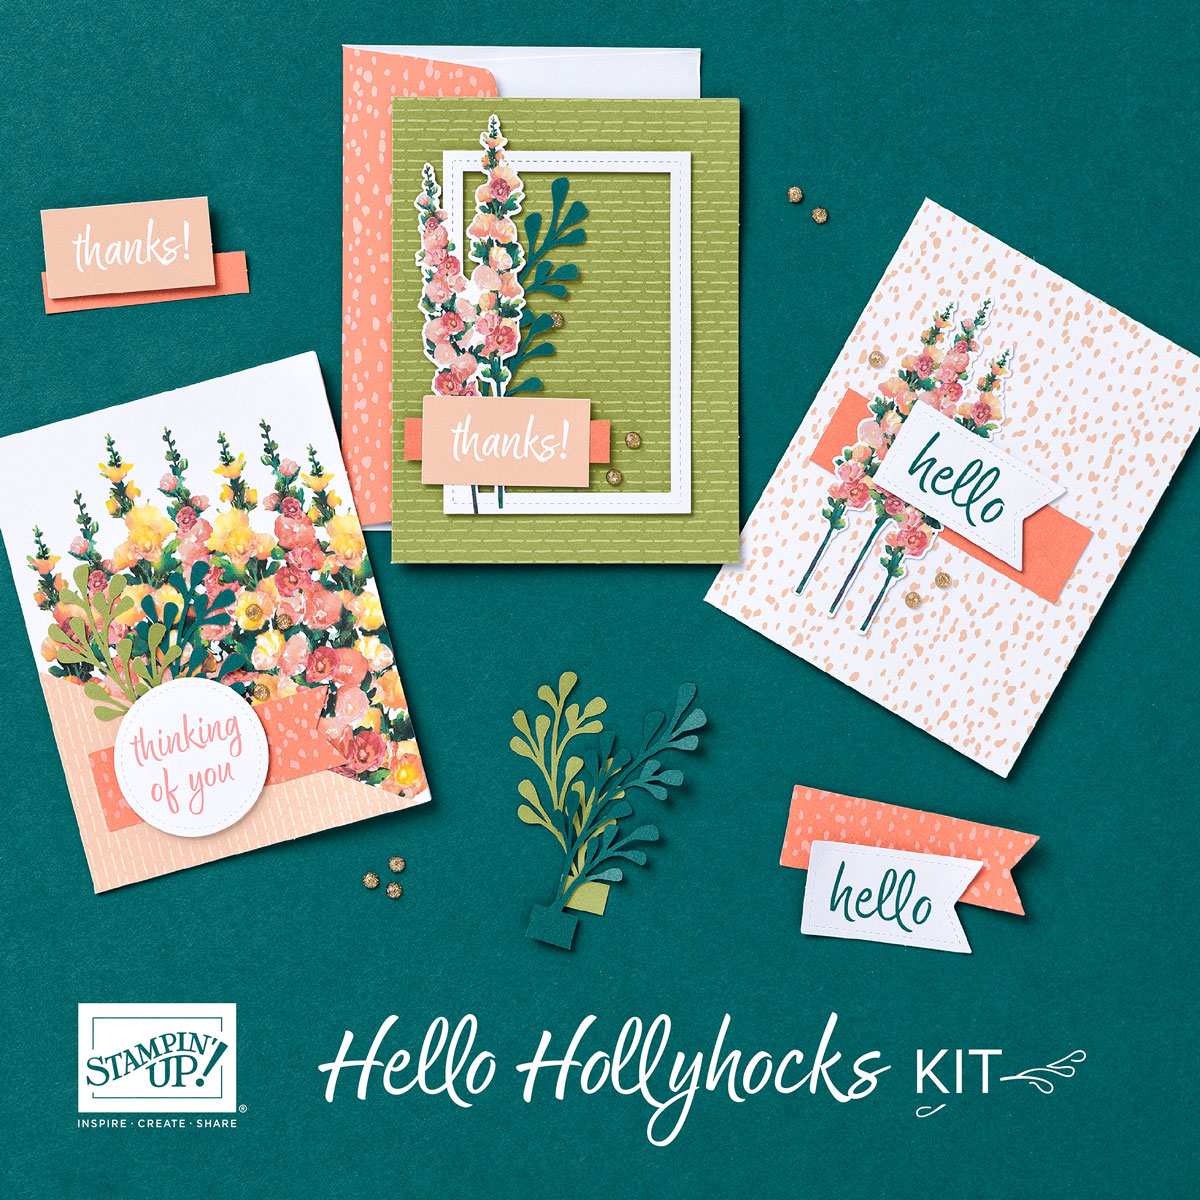 Stampin' Up Kits Collection Hello Hollyhocks